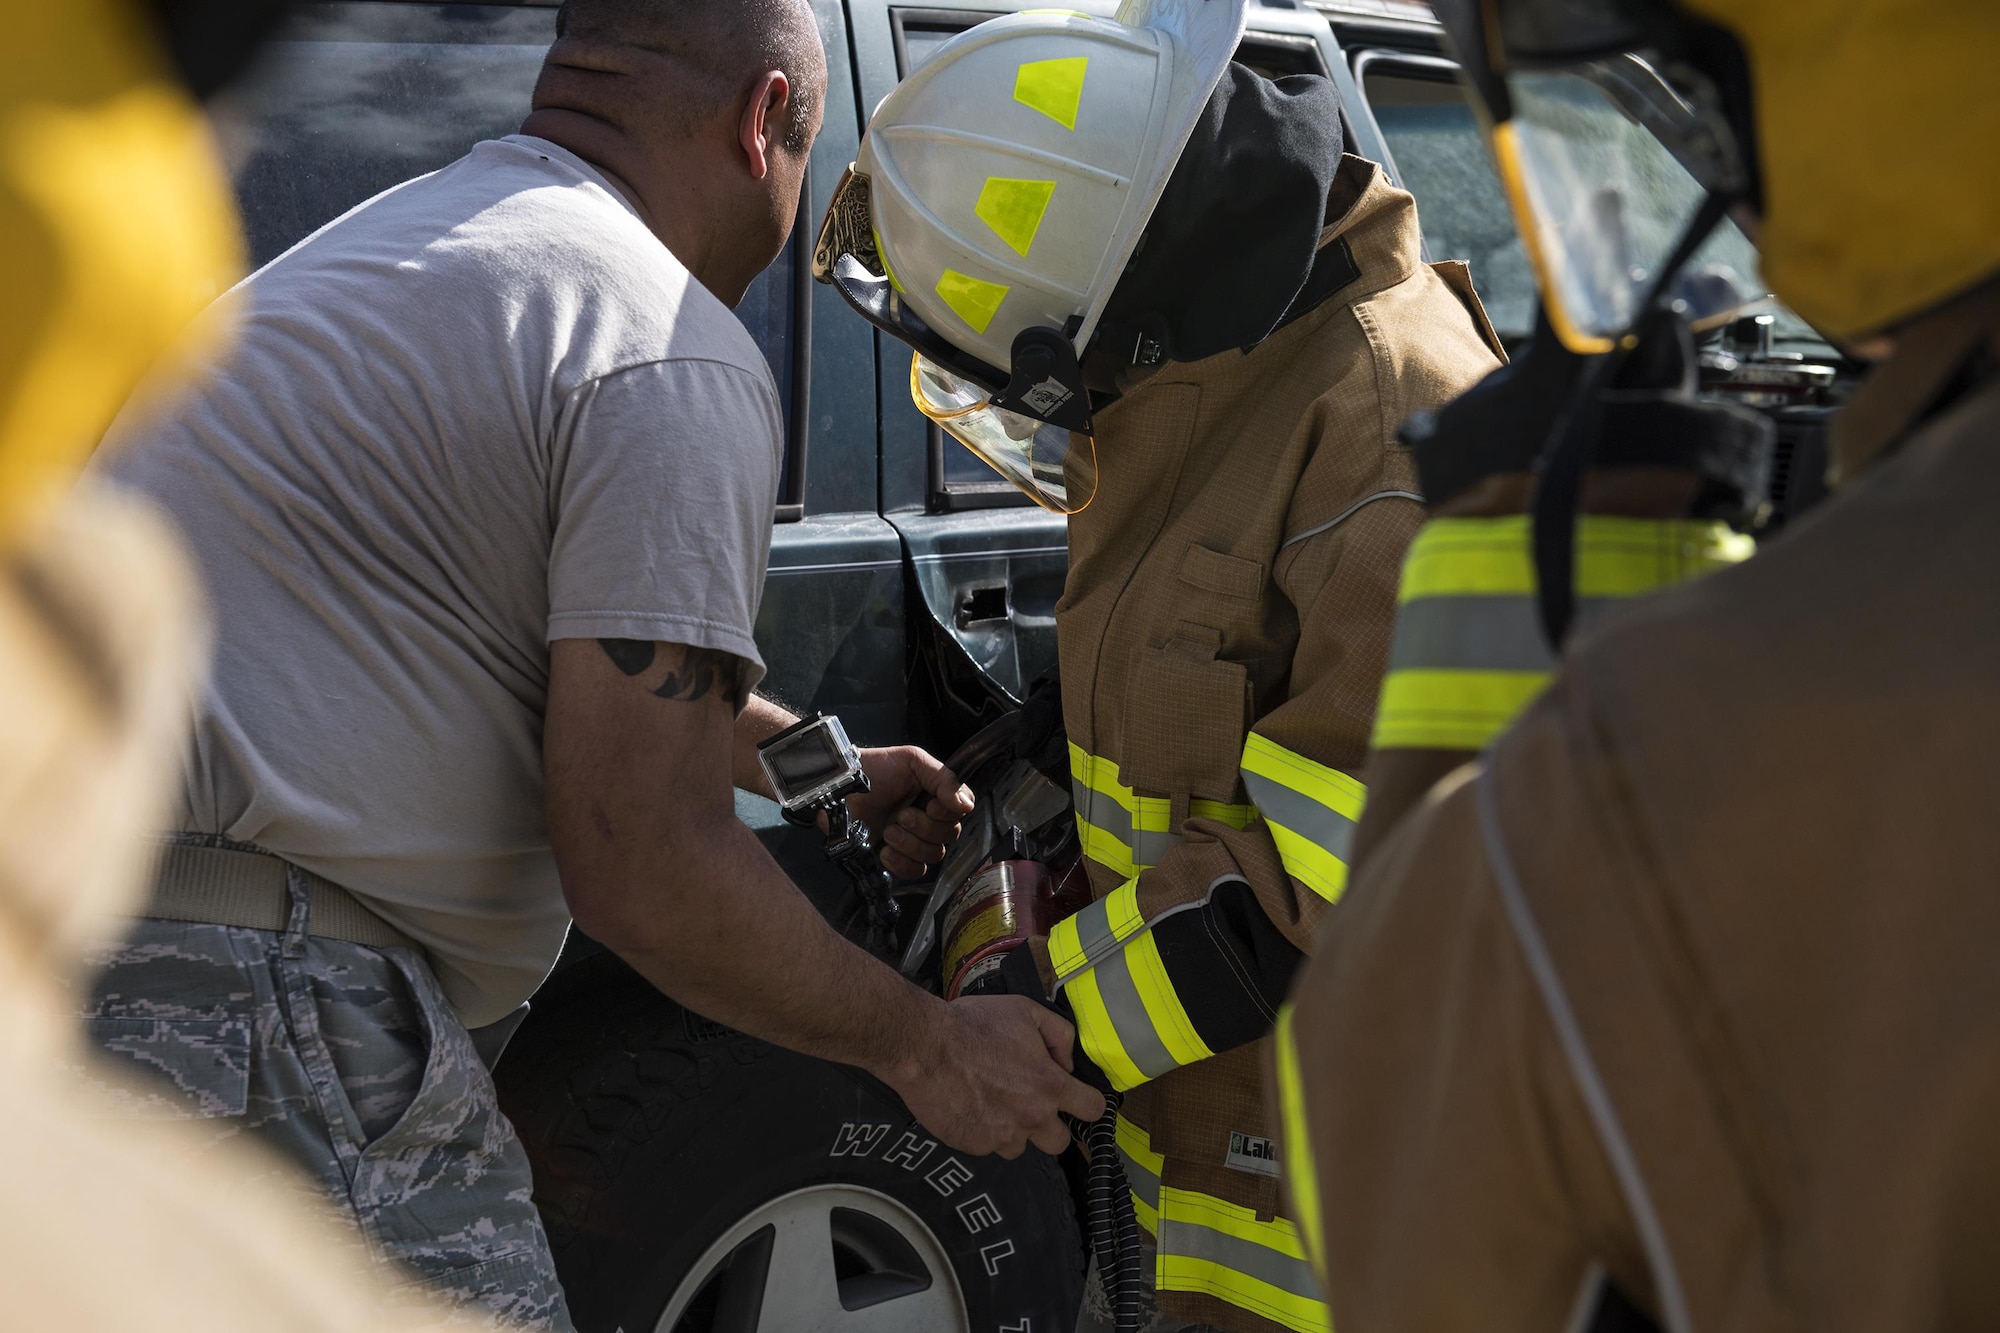 An instructor guides a student using a spreader, also known as the jaws of life, during Vehicle Extrication training, Jan. 13, 2017, at Moody Air Force Base, Ga. The instructor showed the student to keep an eye out for openings the spreader created, then close the spreader, and force it into those openings to get the door off faster. (U.S. Air Force photo by Airman 1st Class Janiqua P. Robinson)